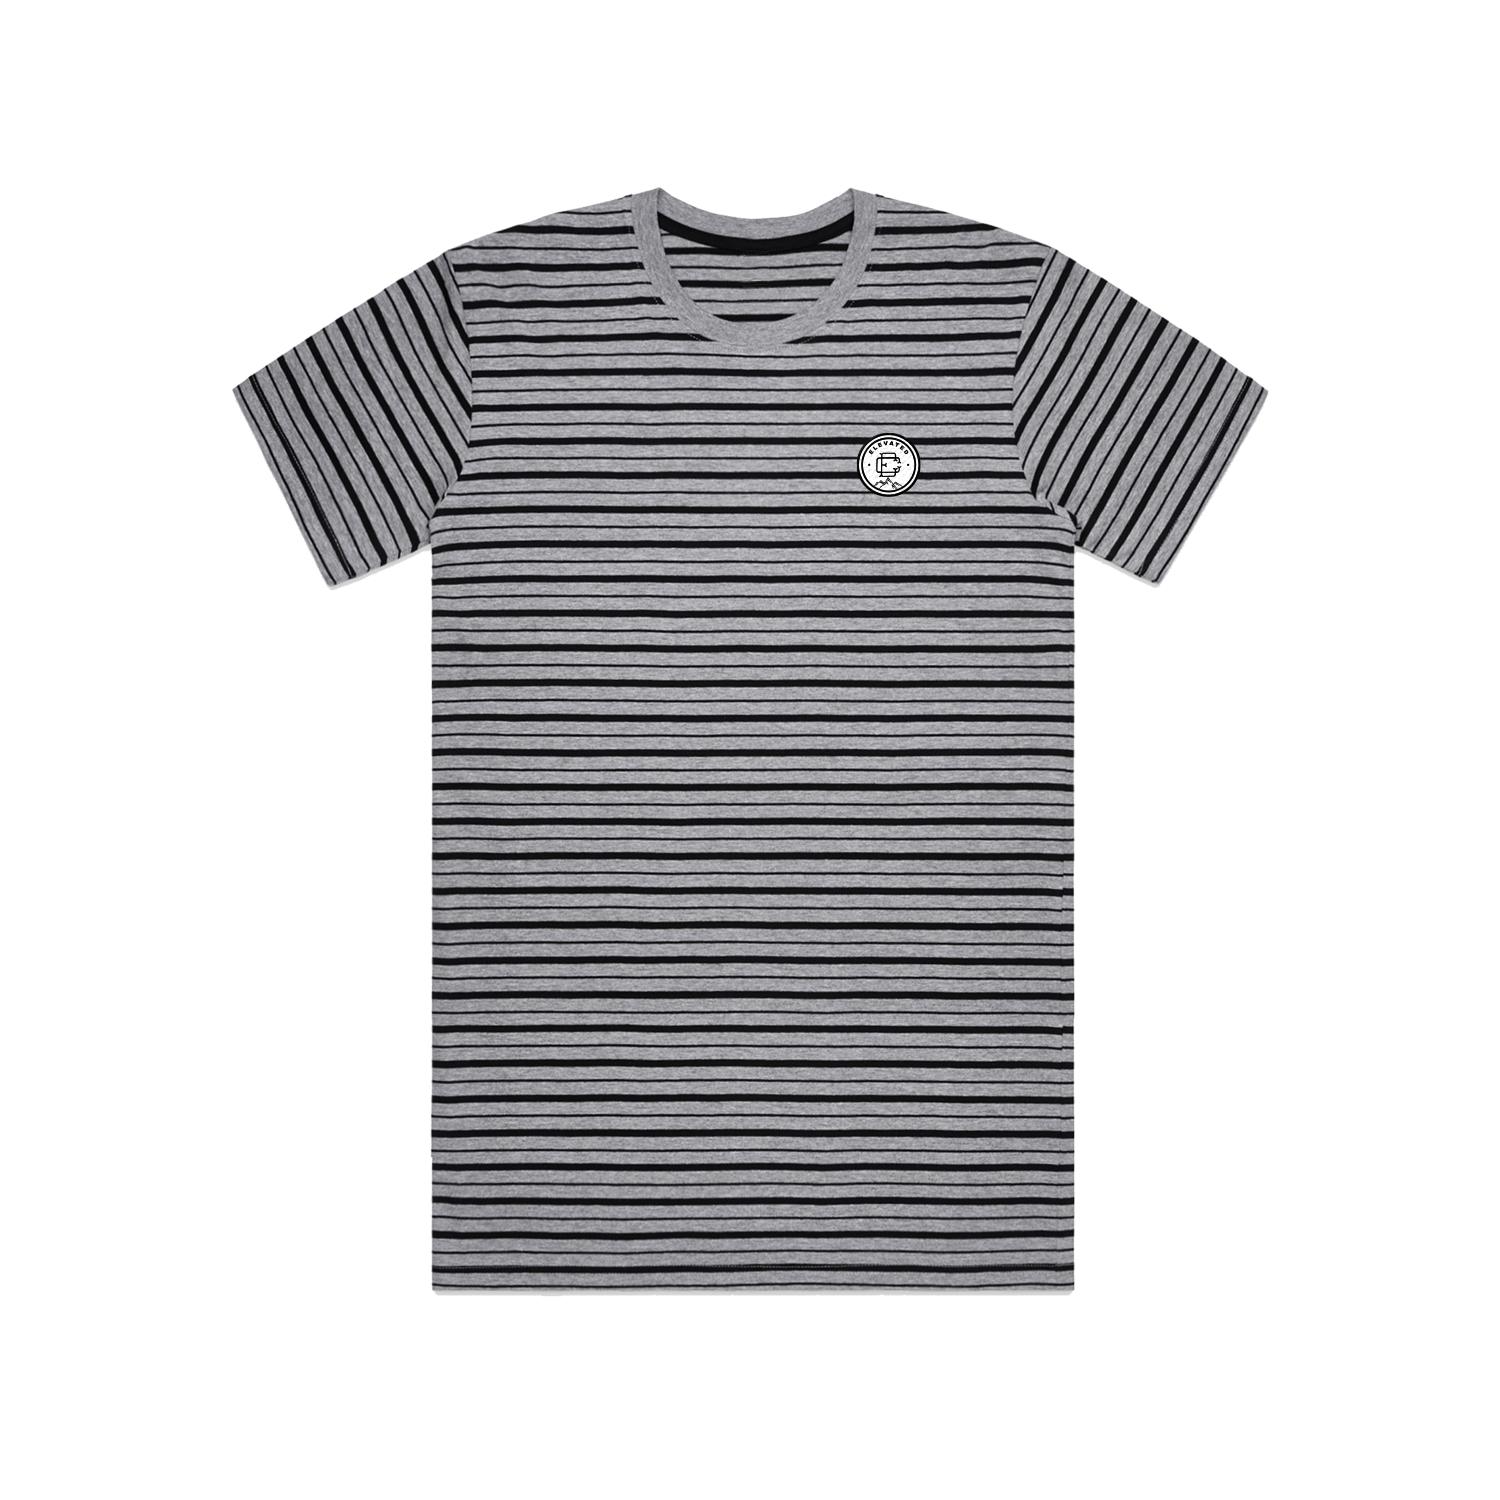 Elevated Stripped Tee - Dark Shadow Haze Grey/Black (SOLD OUT)